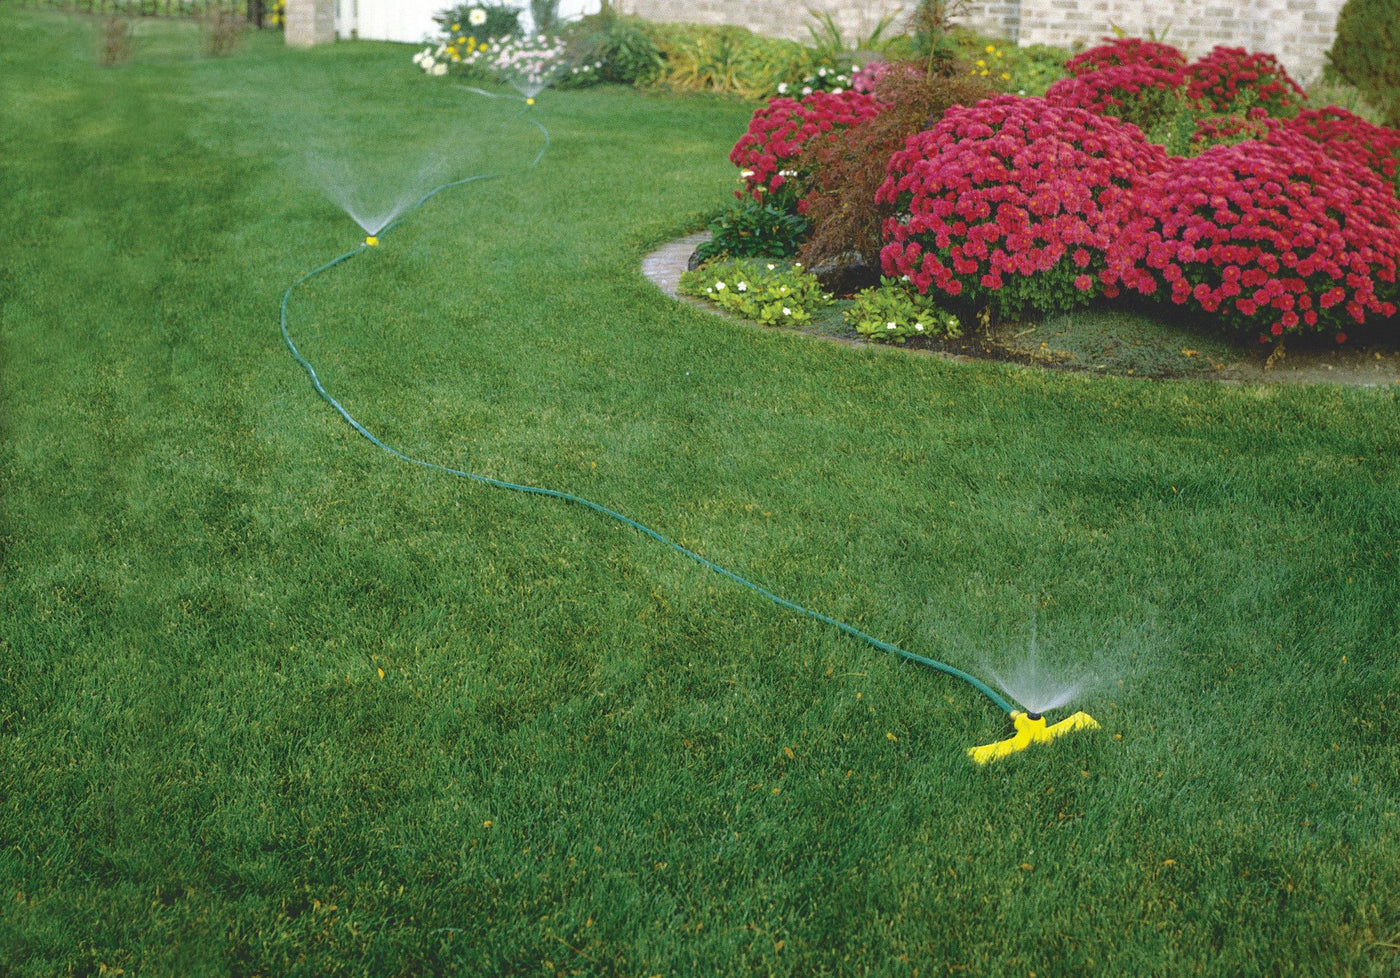 Port-a-rain watering sprinkler system set up in a yard spraying water. 